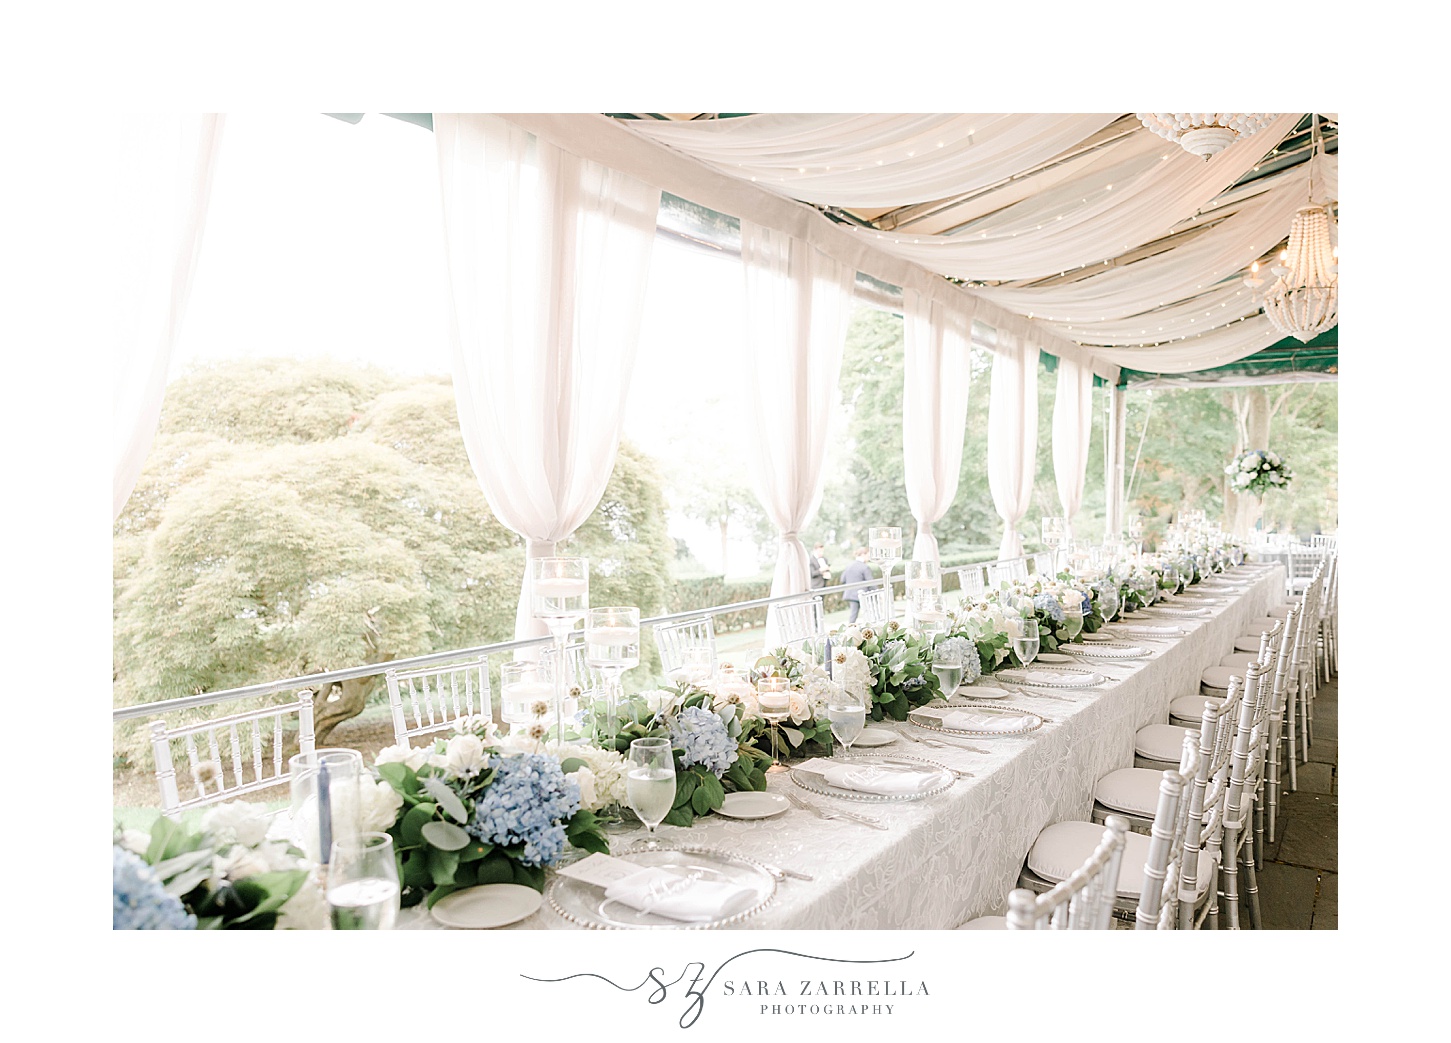 Glen Manor House wedding reception with family style seating